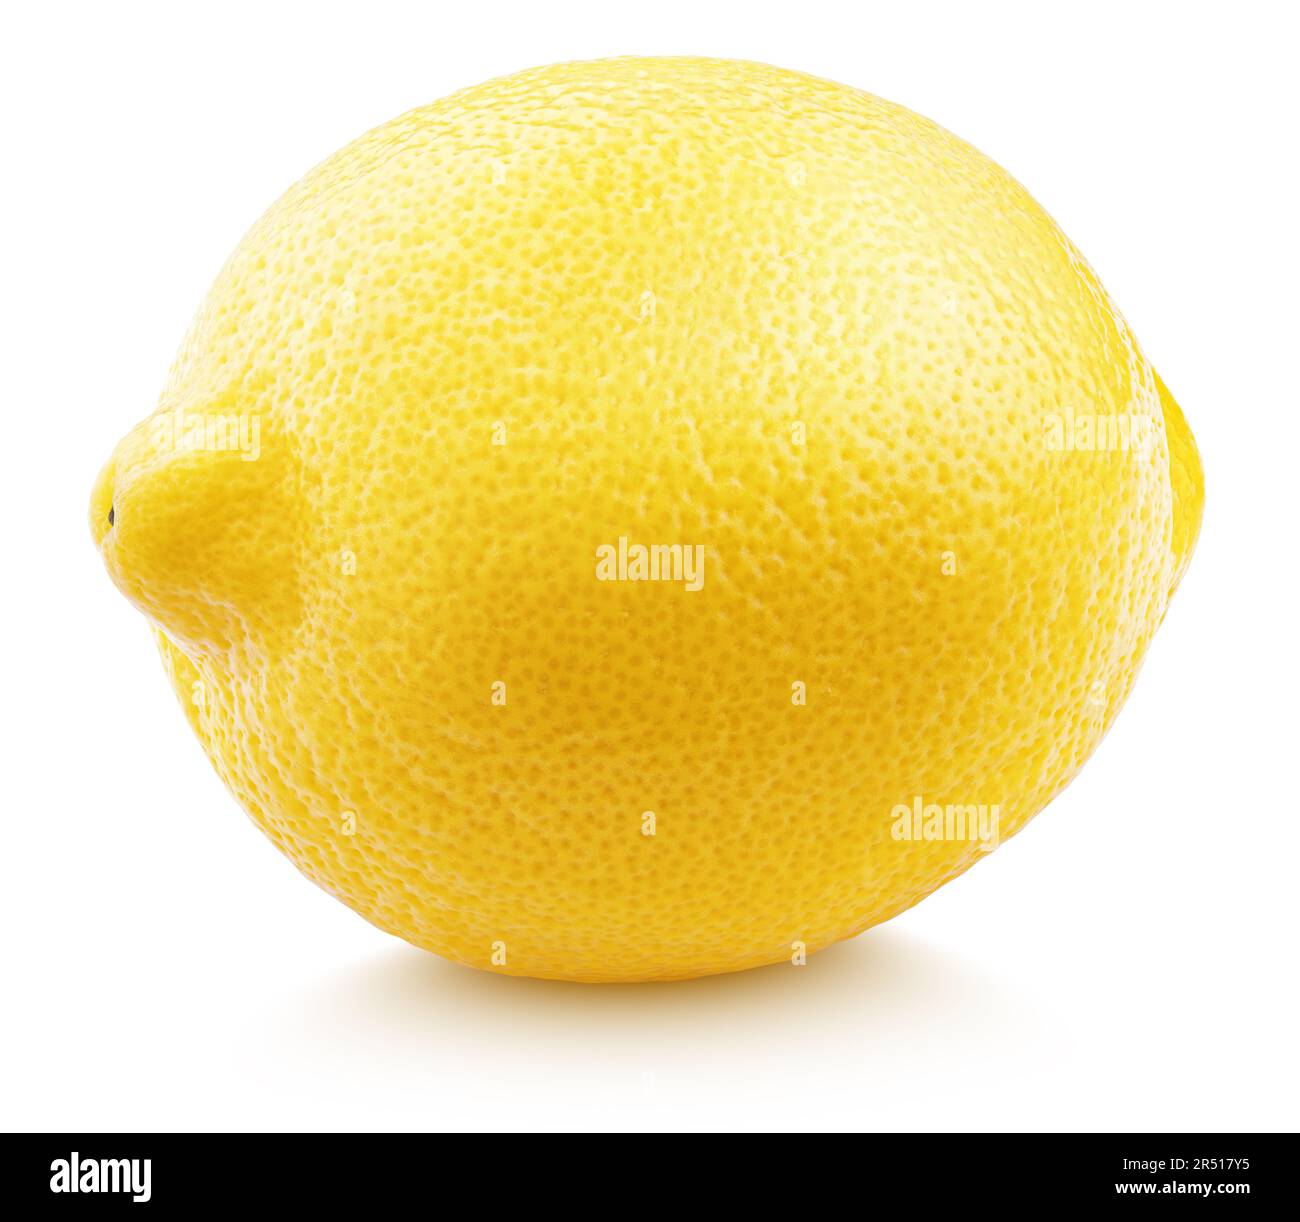 Whole yellow lemon citrus fruit isolated on white background with clipping path. Full depth of field. Stock Photo